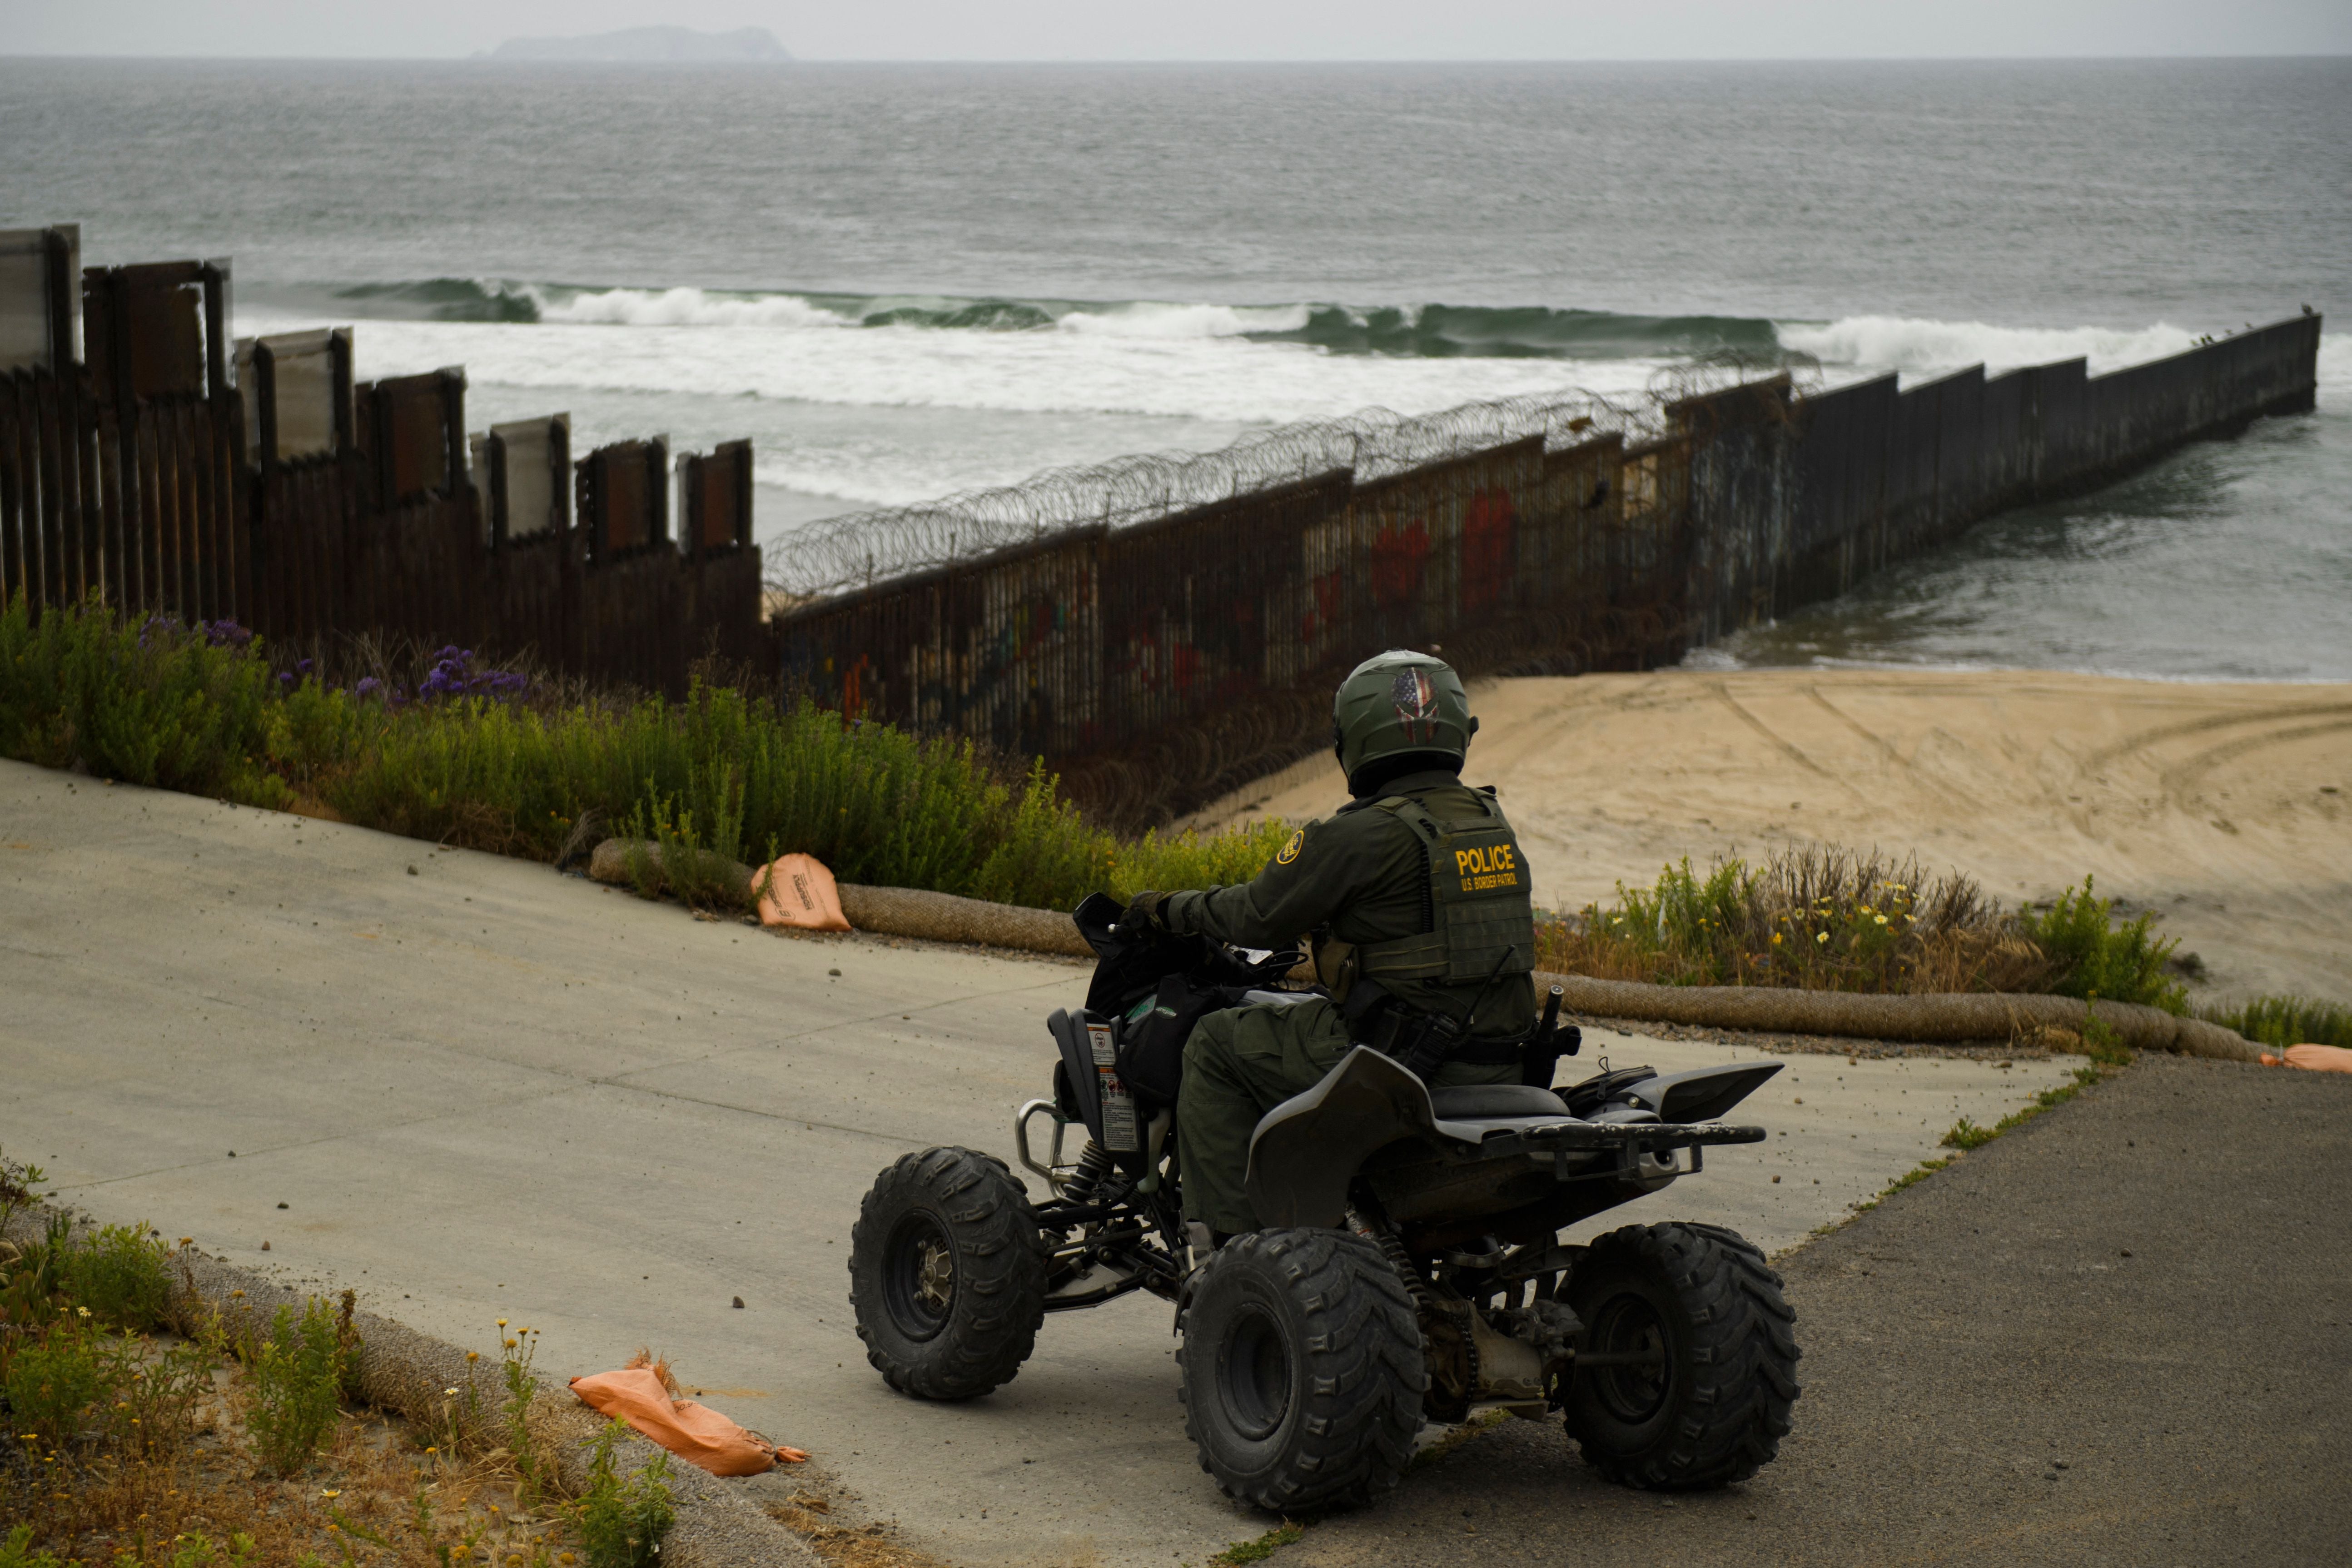 A US Border Patrol agent patrols on an all-terrain vehicle where the border wall ends in the Pacific Ocean along the US-Mexico border between San Diego and Tijuana, during a tour with the US Customs and Border Protection on May 10, 2021 at International Friendship Park in San Diego County, California.